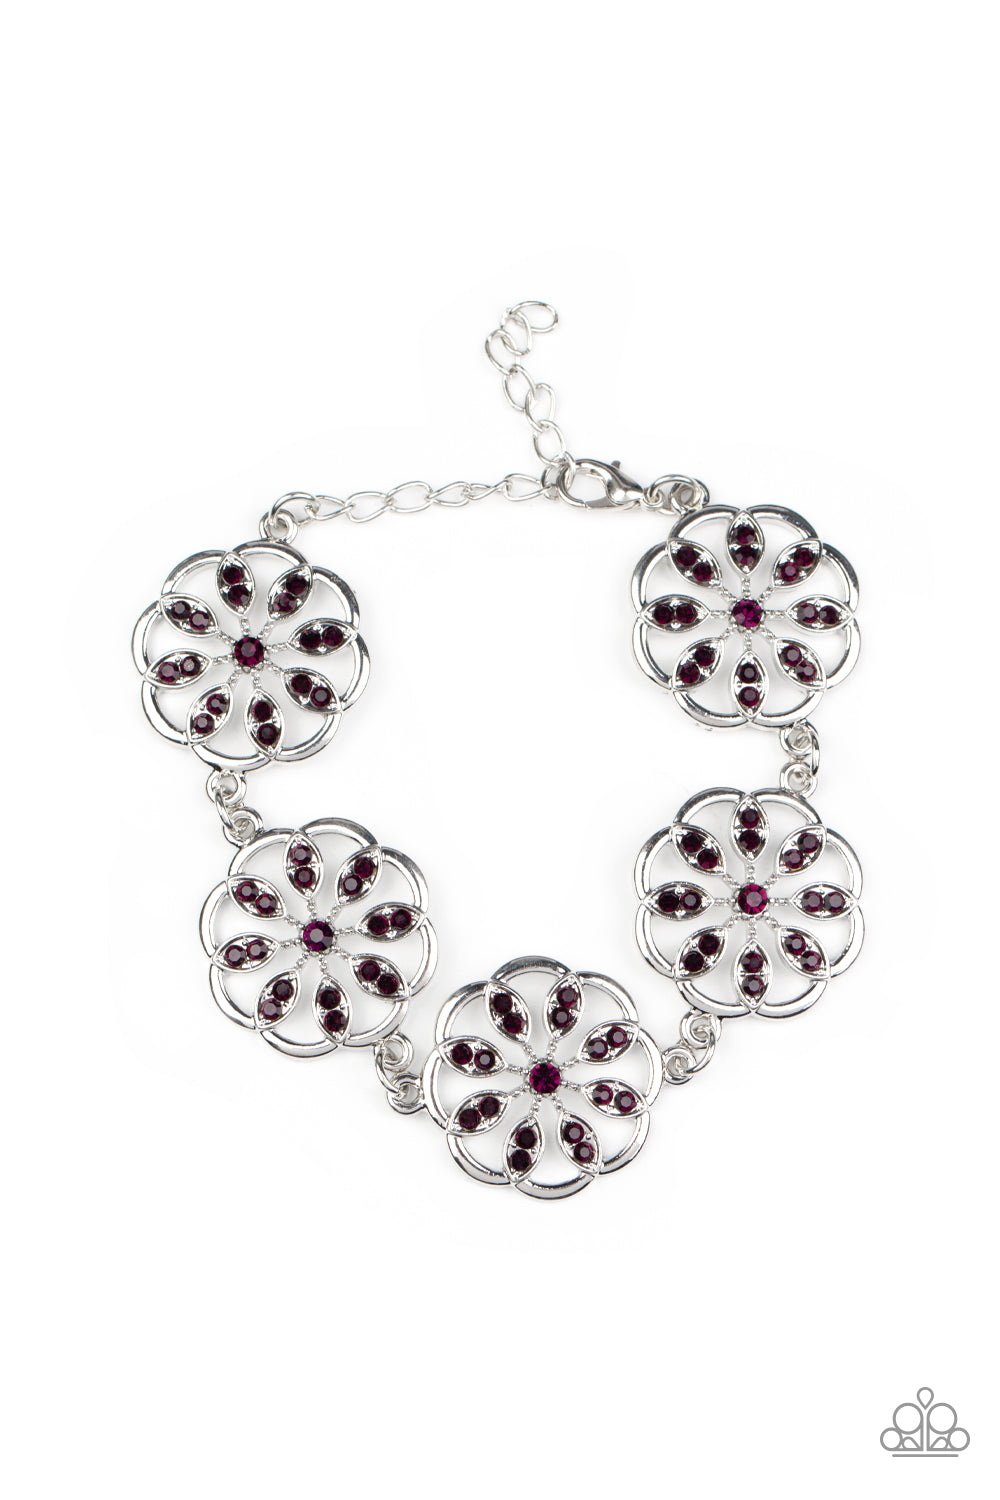 Blooming Bling - Purple Floral - Silver Bracelet - Paparazzi Accessories - 
Adorned with purple rhinestone floral accents, scalloped silver frames delicately link around the wrist for a sparkly seasonal fashion. Features an adjustable clasp closure. Sold as one individual bracelet.
